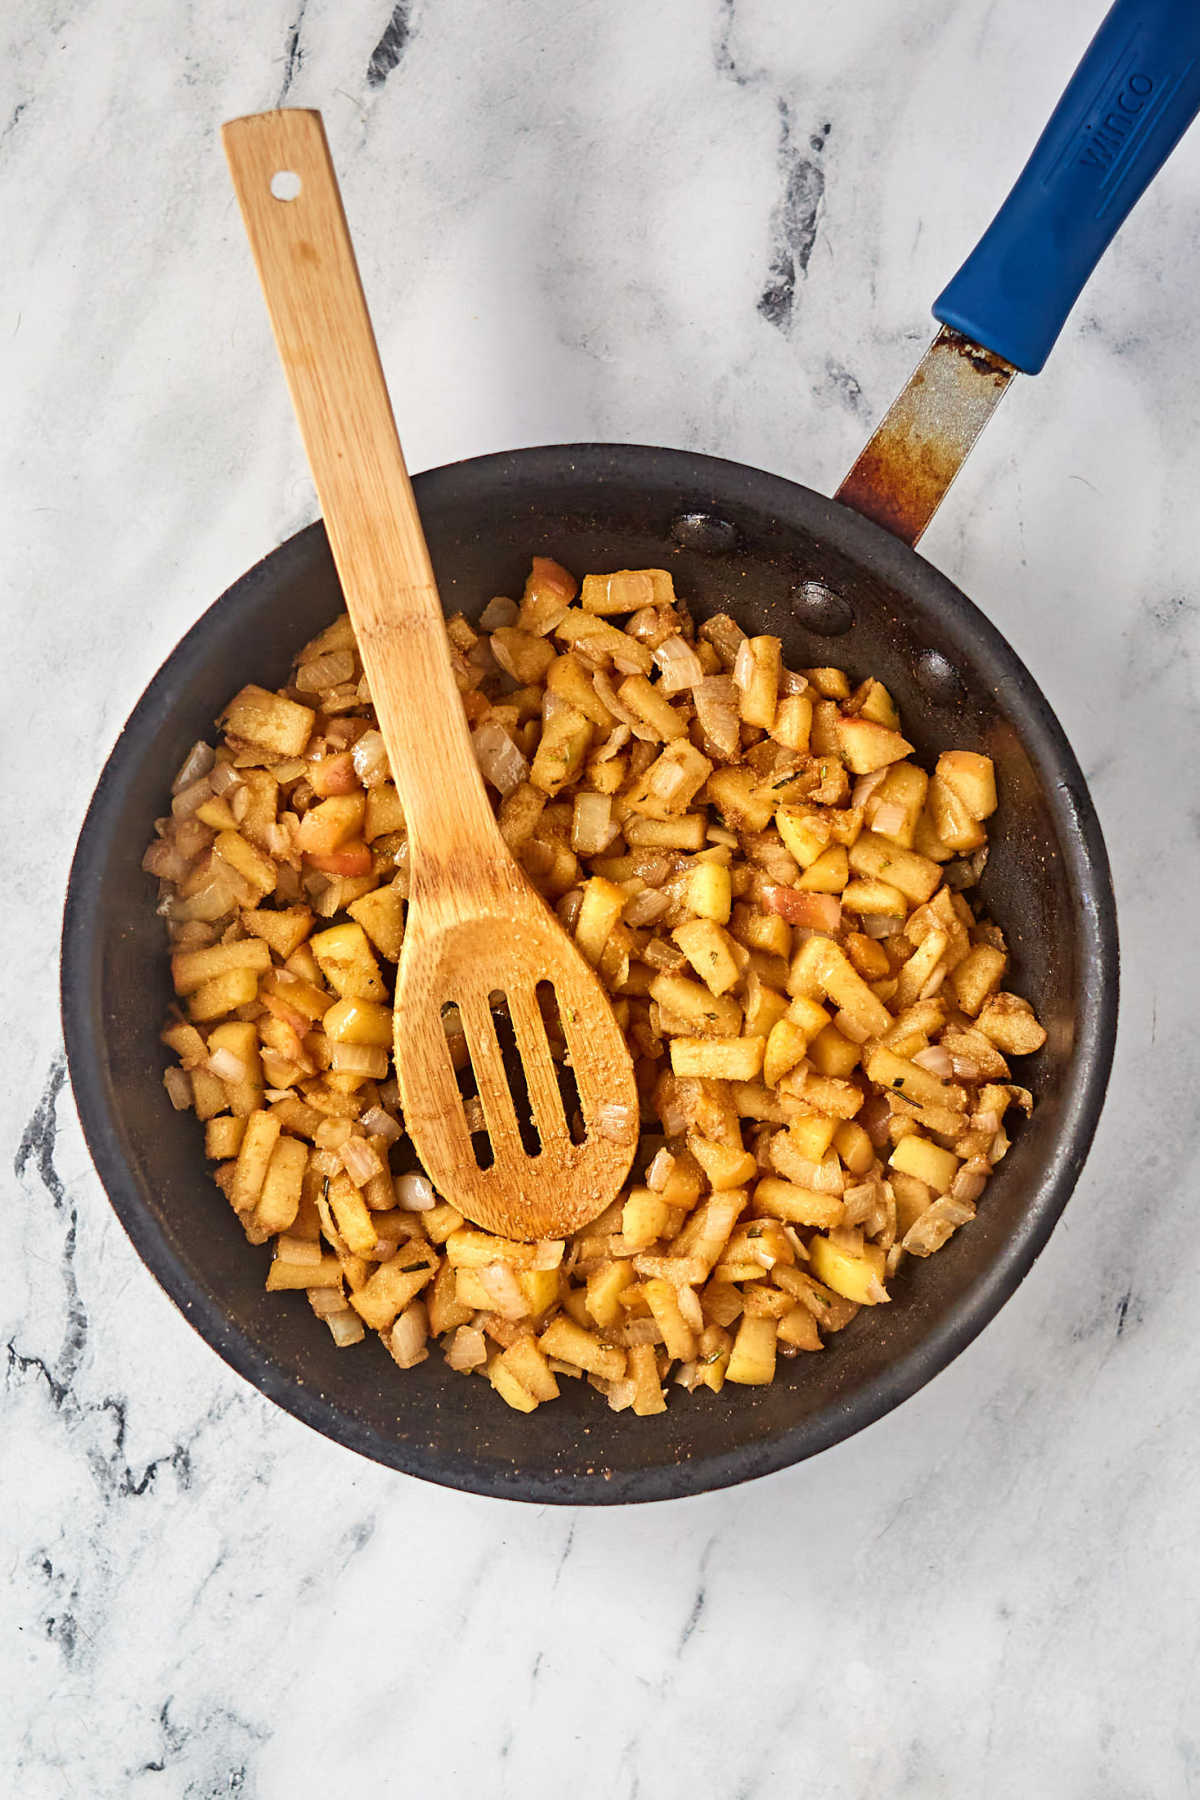 Skillet with cooked apple mixture, browned from being cooked and the balsamic vinegar inside.